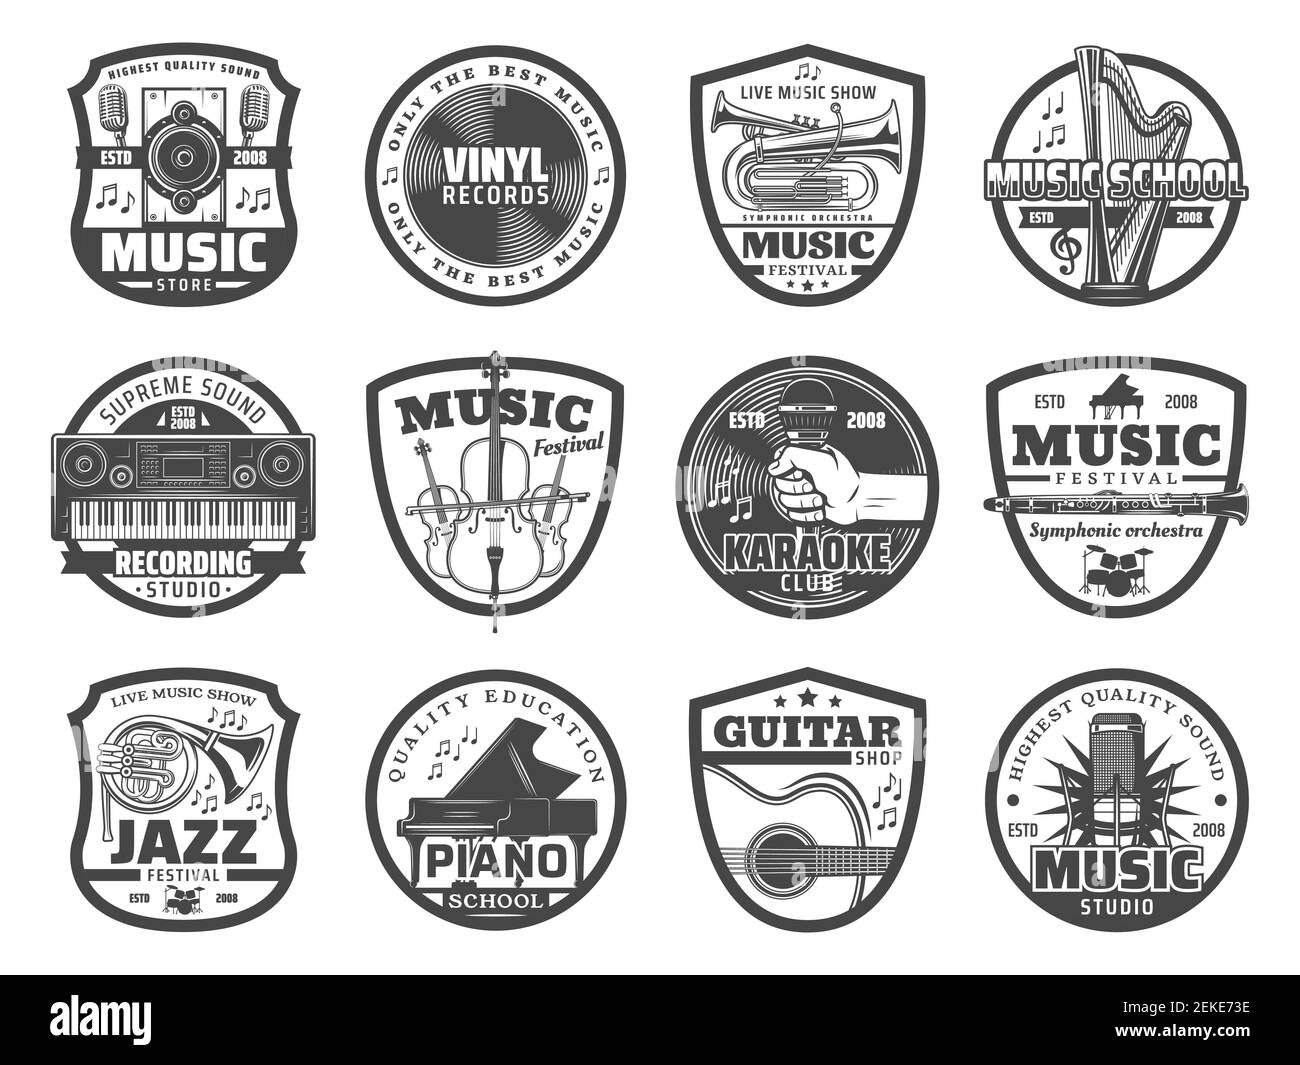 Musical instrument and equipment badges of music shop and sound recording studio vector design. Guitar, piano and microphone, vinyl records, trumpet a Stock Vector